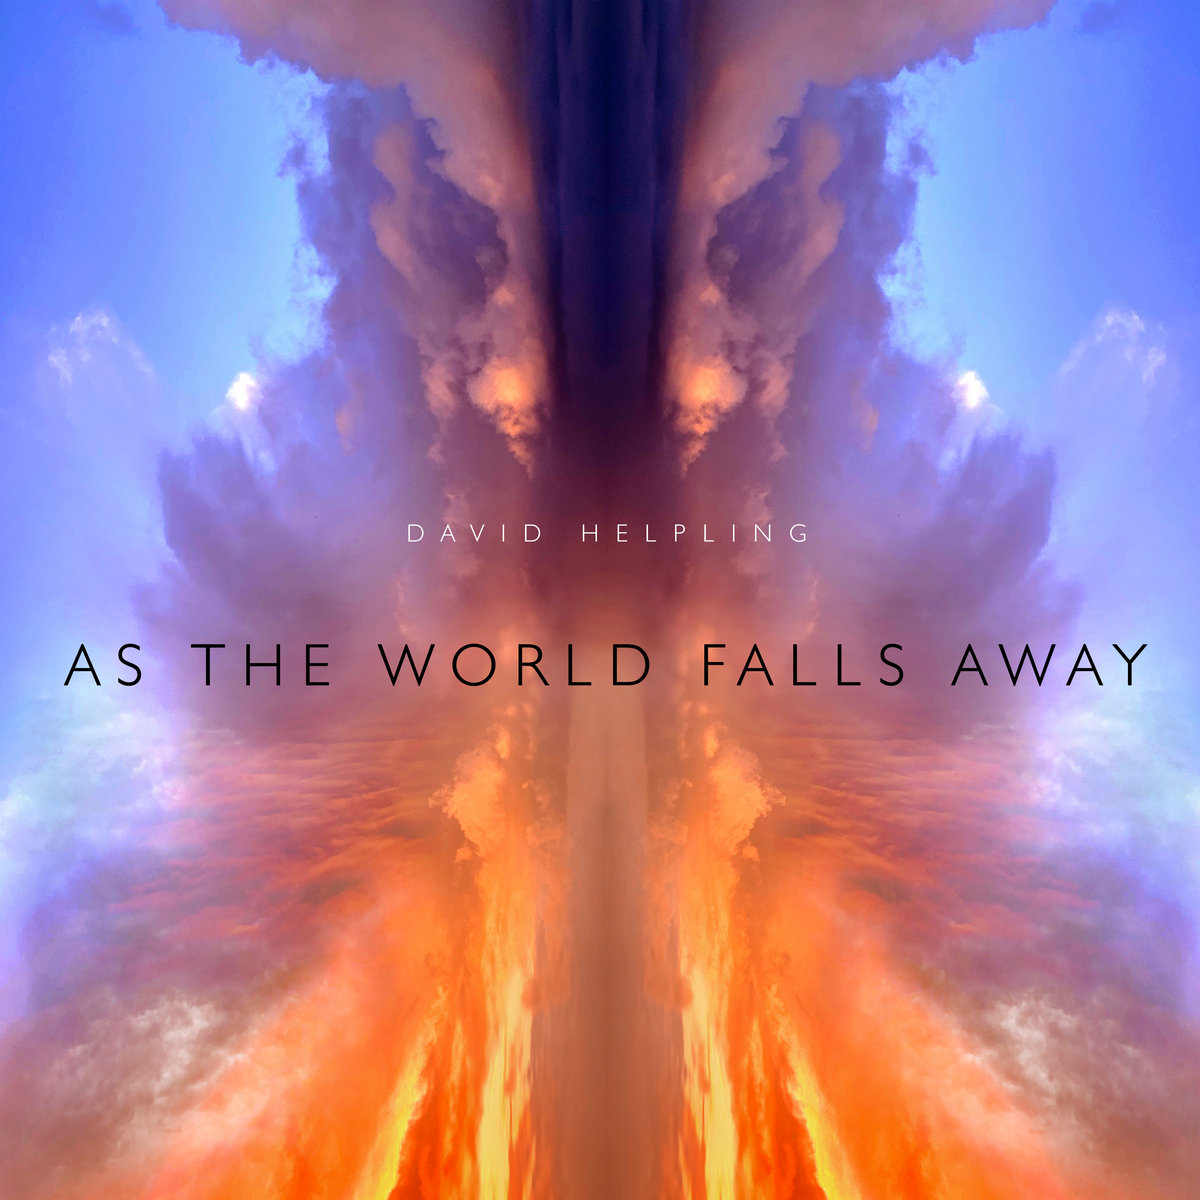 AS THE WORLD FALLS AWAY